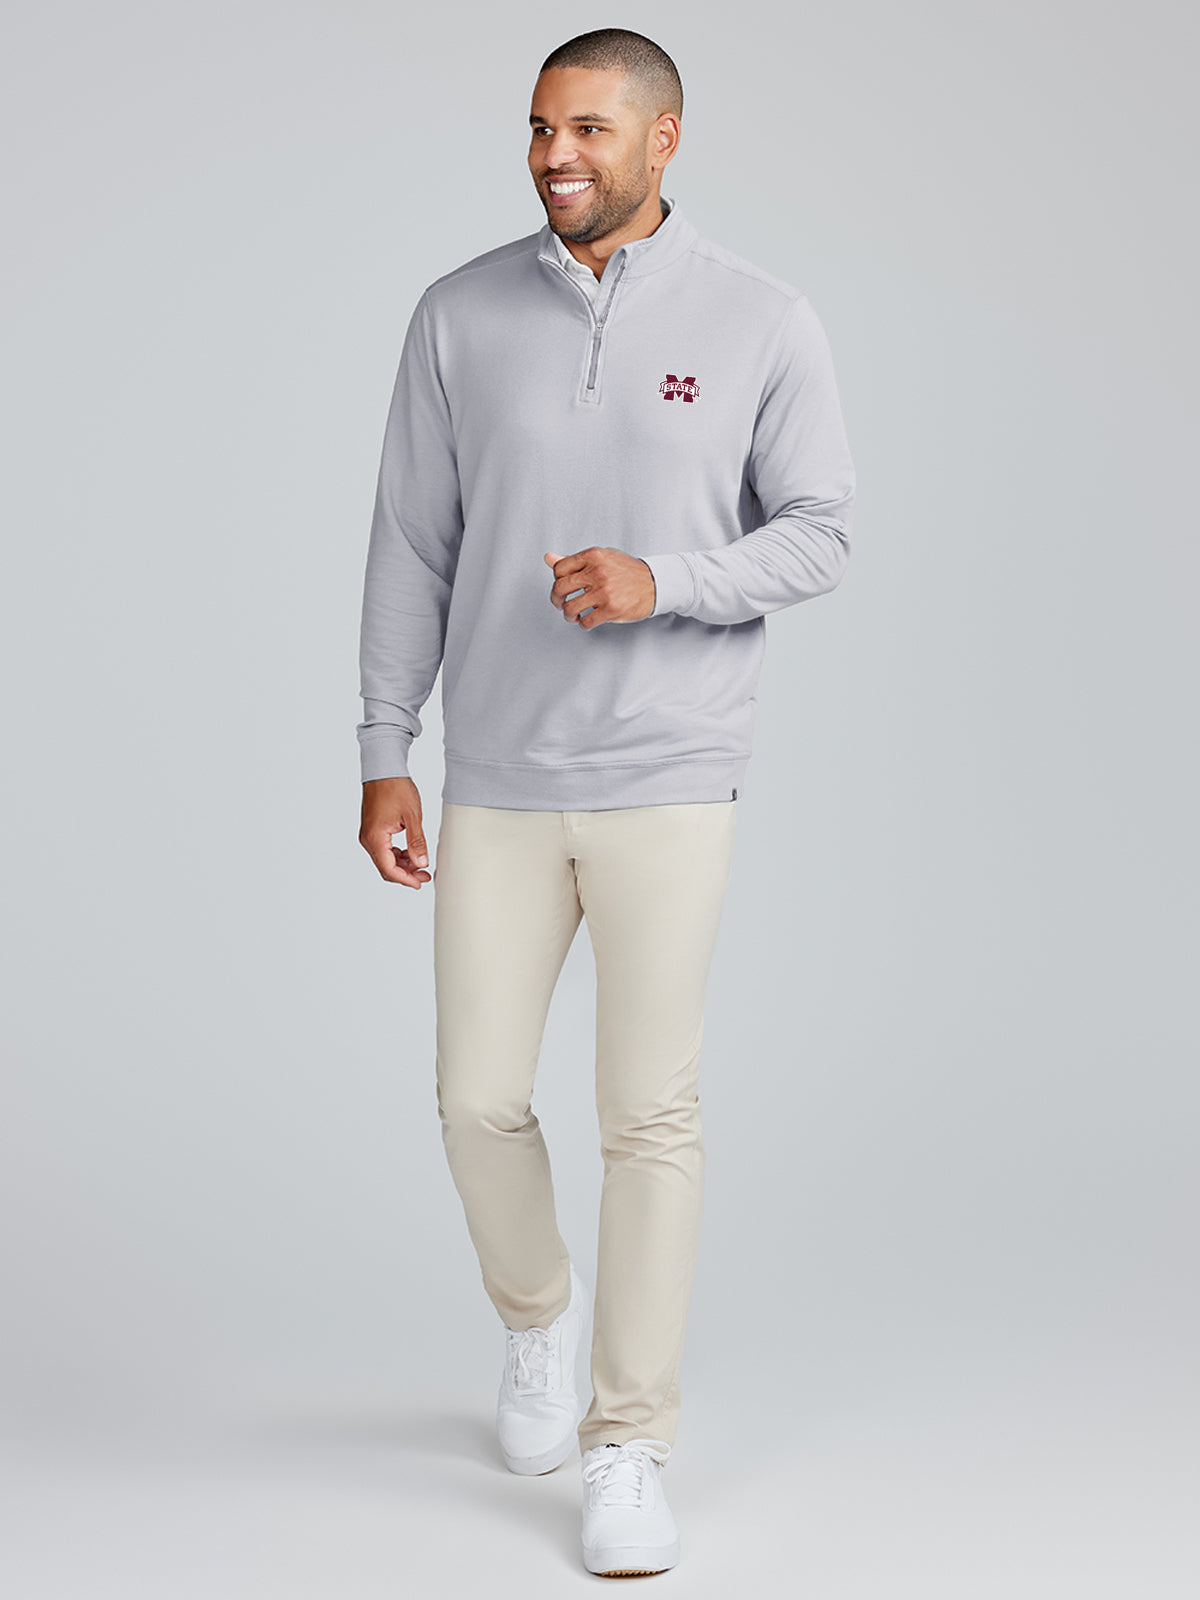 Cloud French Terry Quarter Zip - Mississippi State- tasc Performance (Alloy)